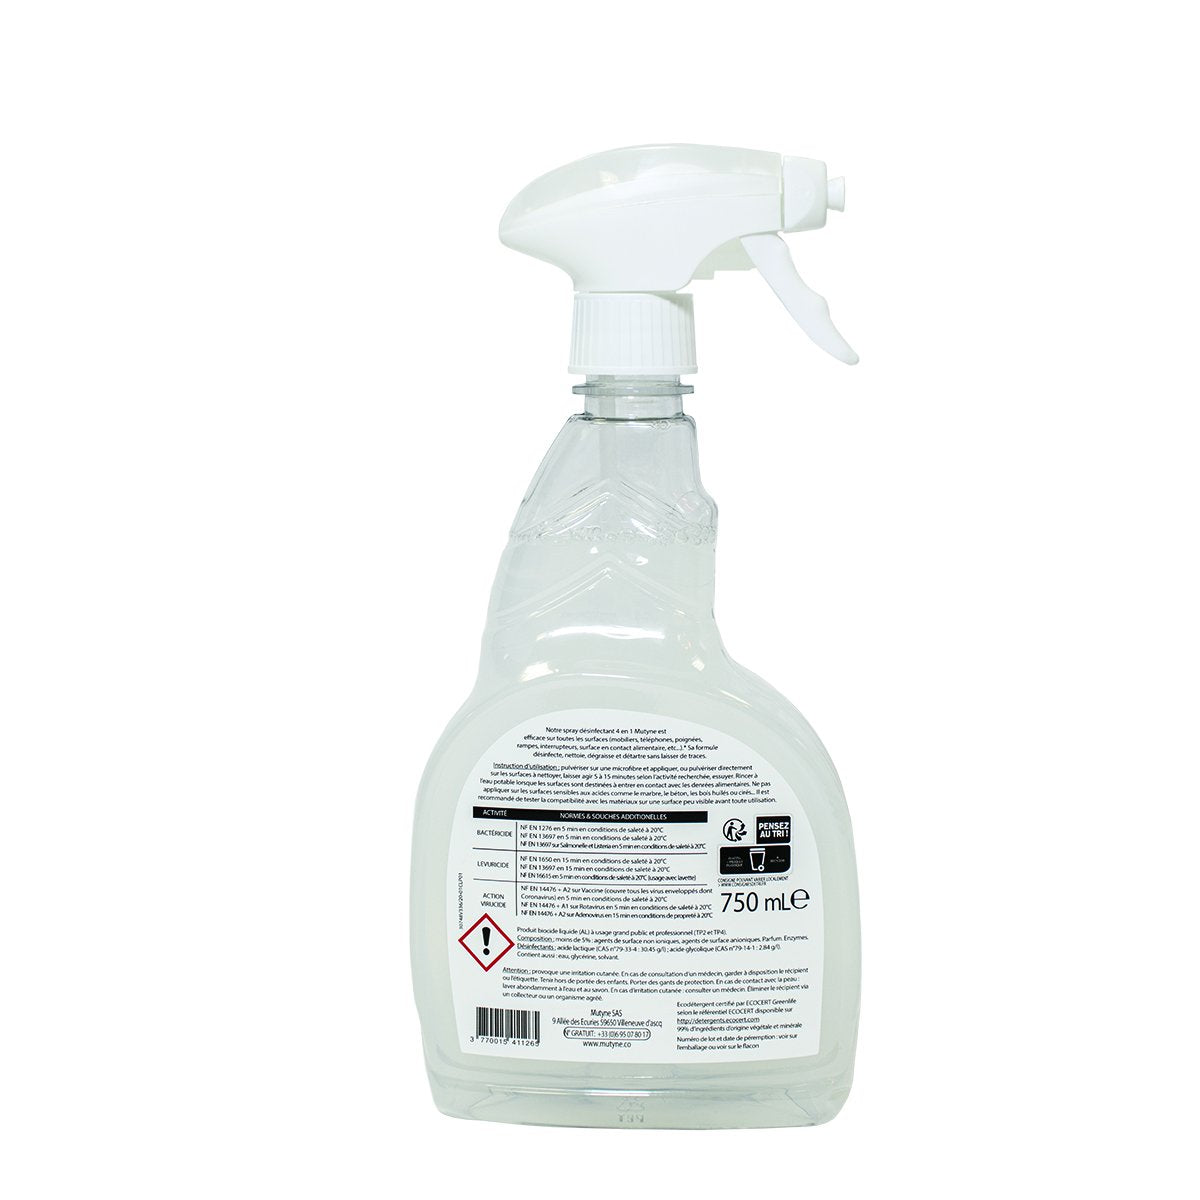 Purell Spray désinfectant surfaces 750 ml - Contact alimentaire - Covid